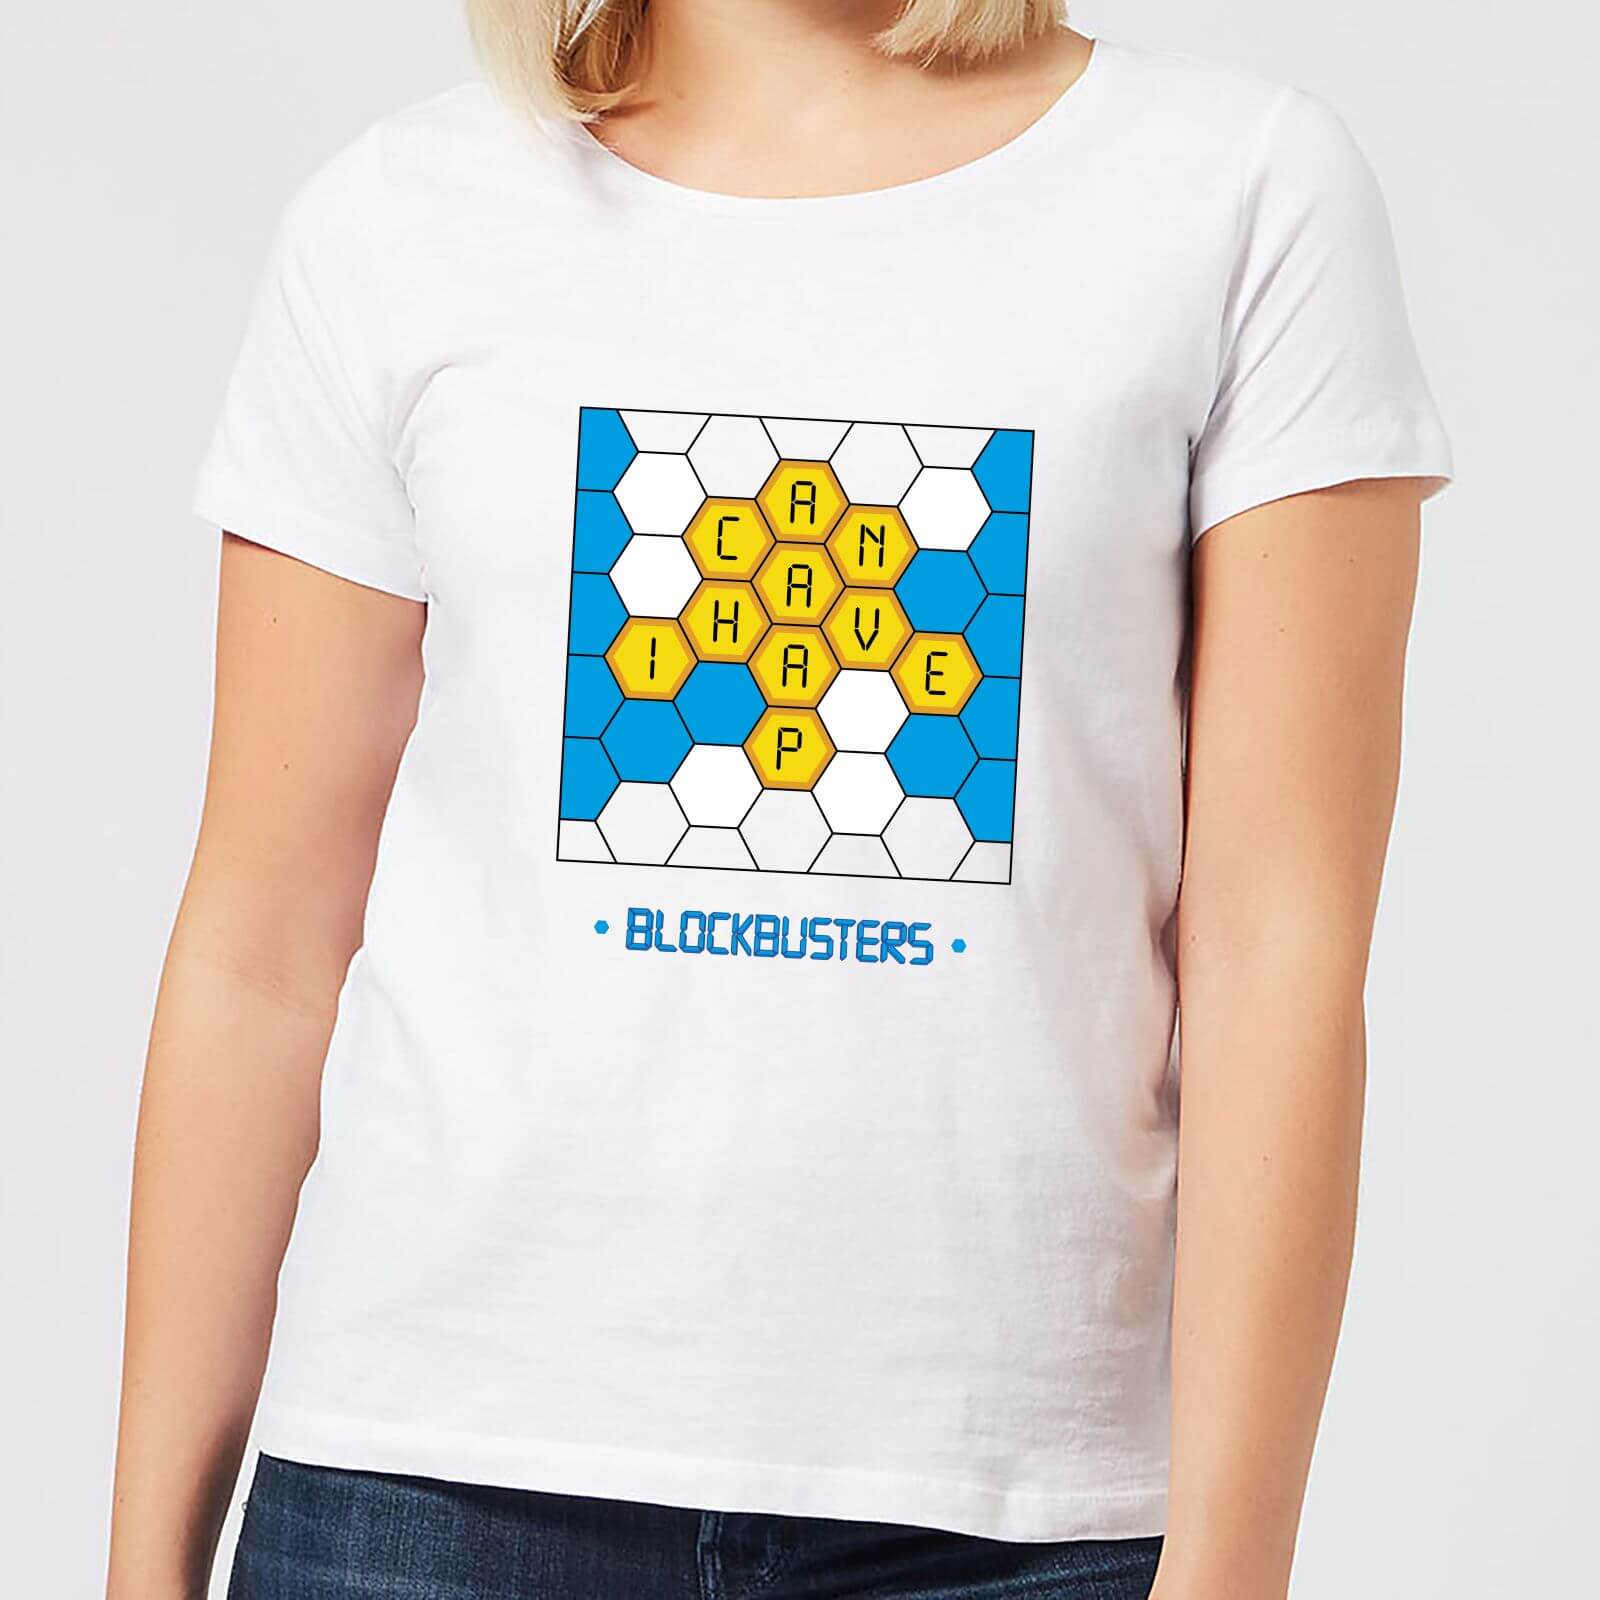 Blockbusters Can I Have A 'P' Women's T-Shirt - White - S